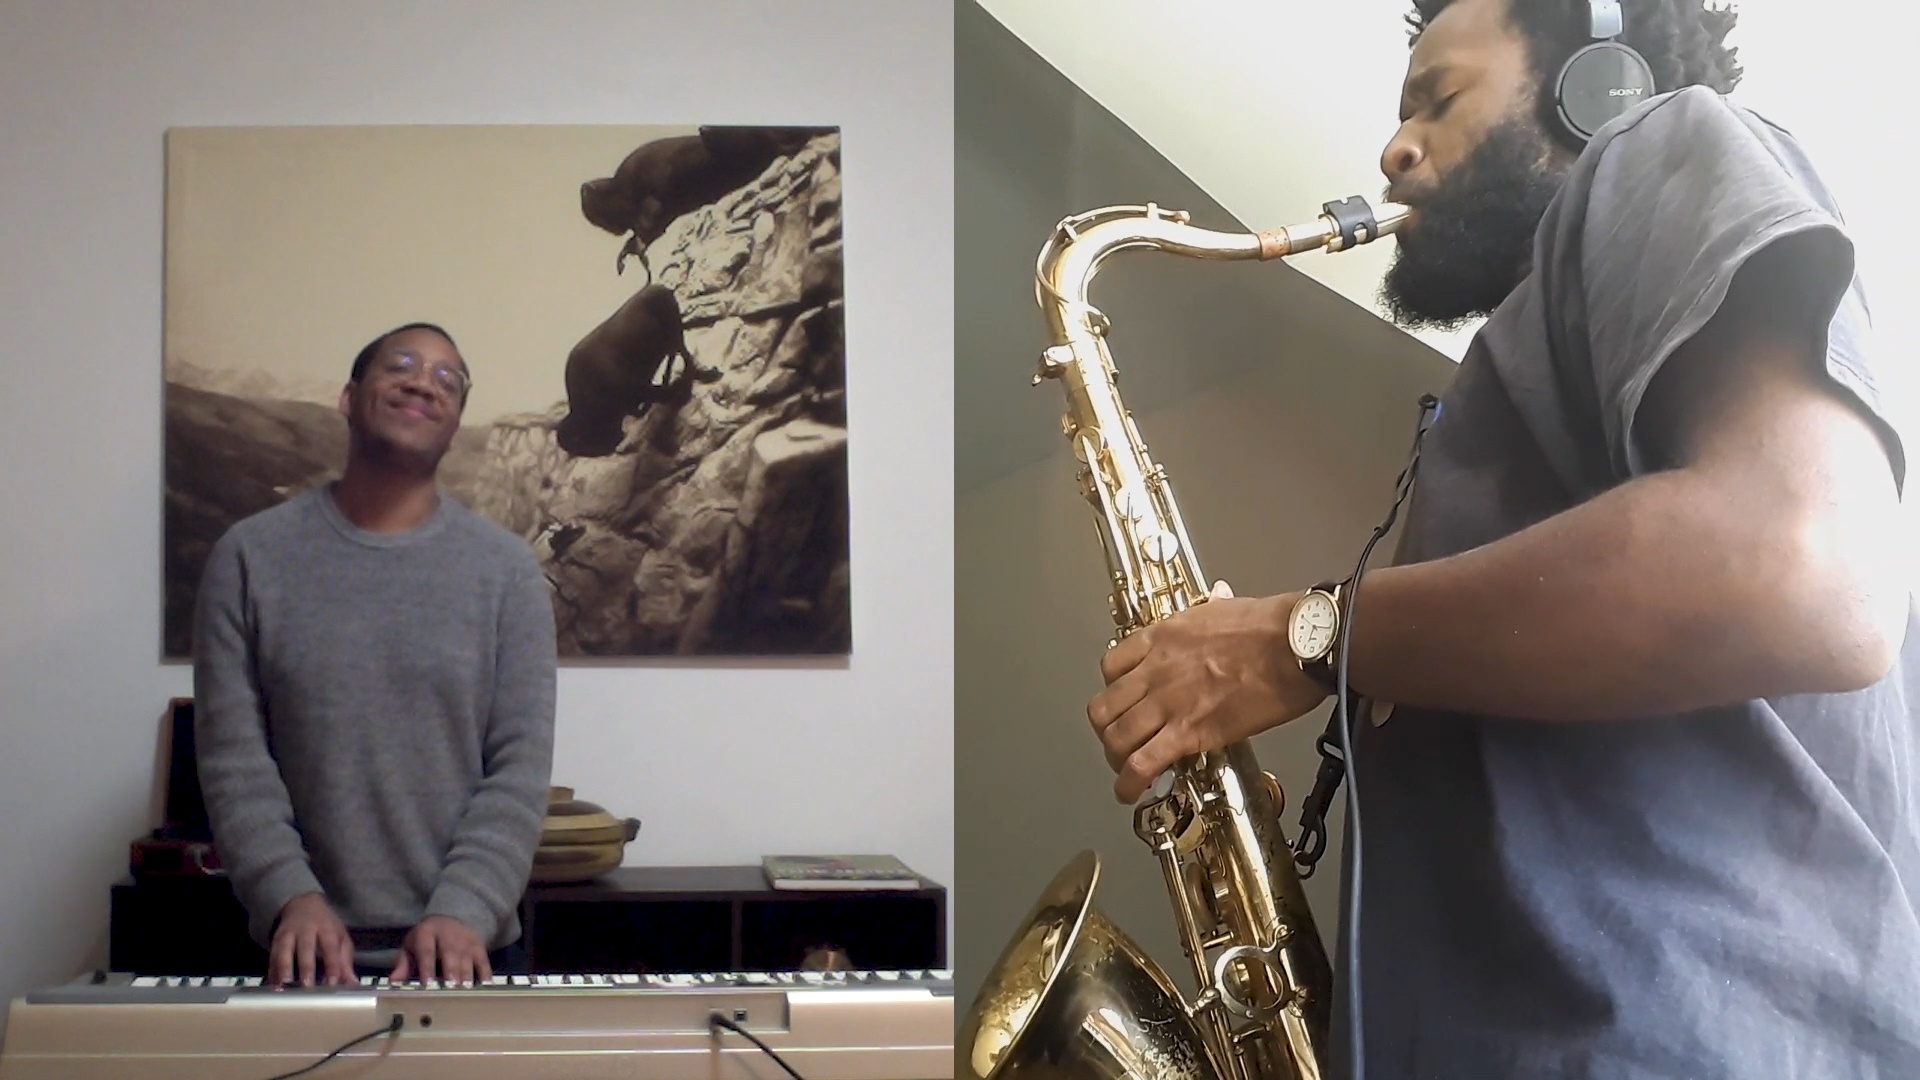 The artists Troy Anthony and Jerome Ellis depicted in a split screen video still with Anthony singing and playing piano against a photographic print and Ellis seen from below playing saxophone in a brightly lit alcove